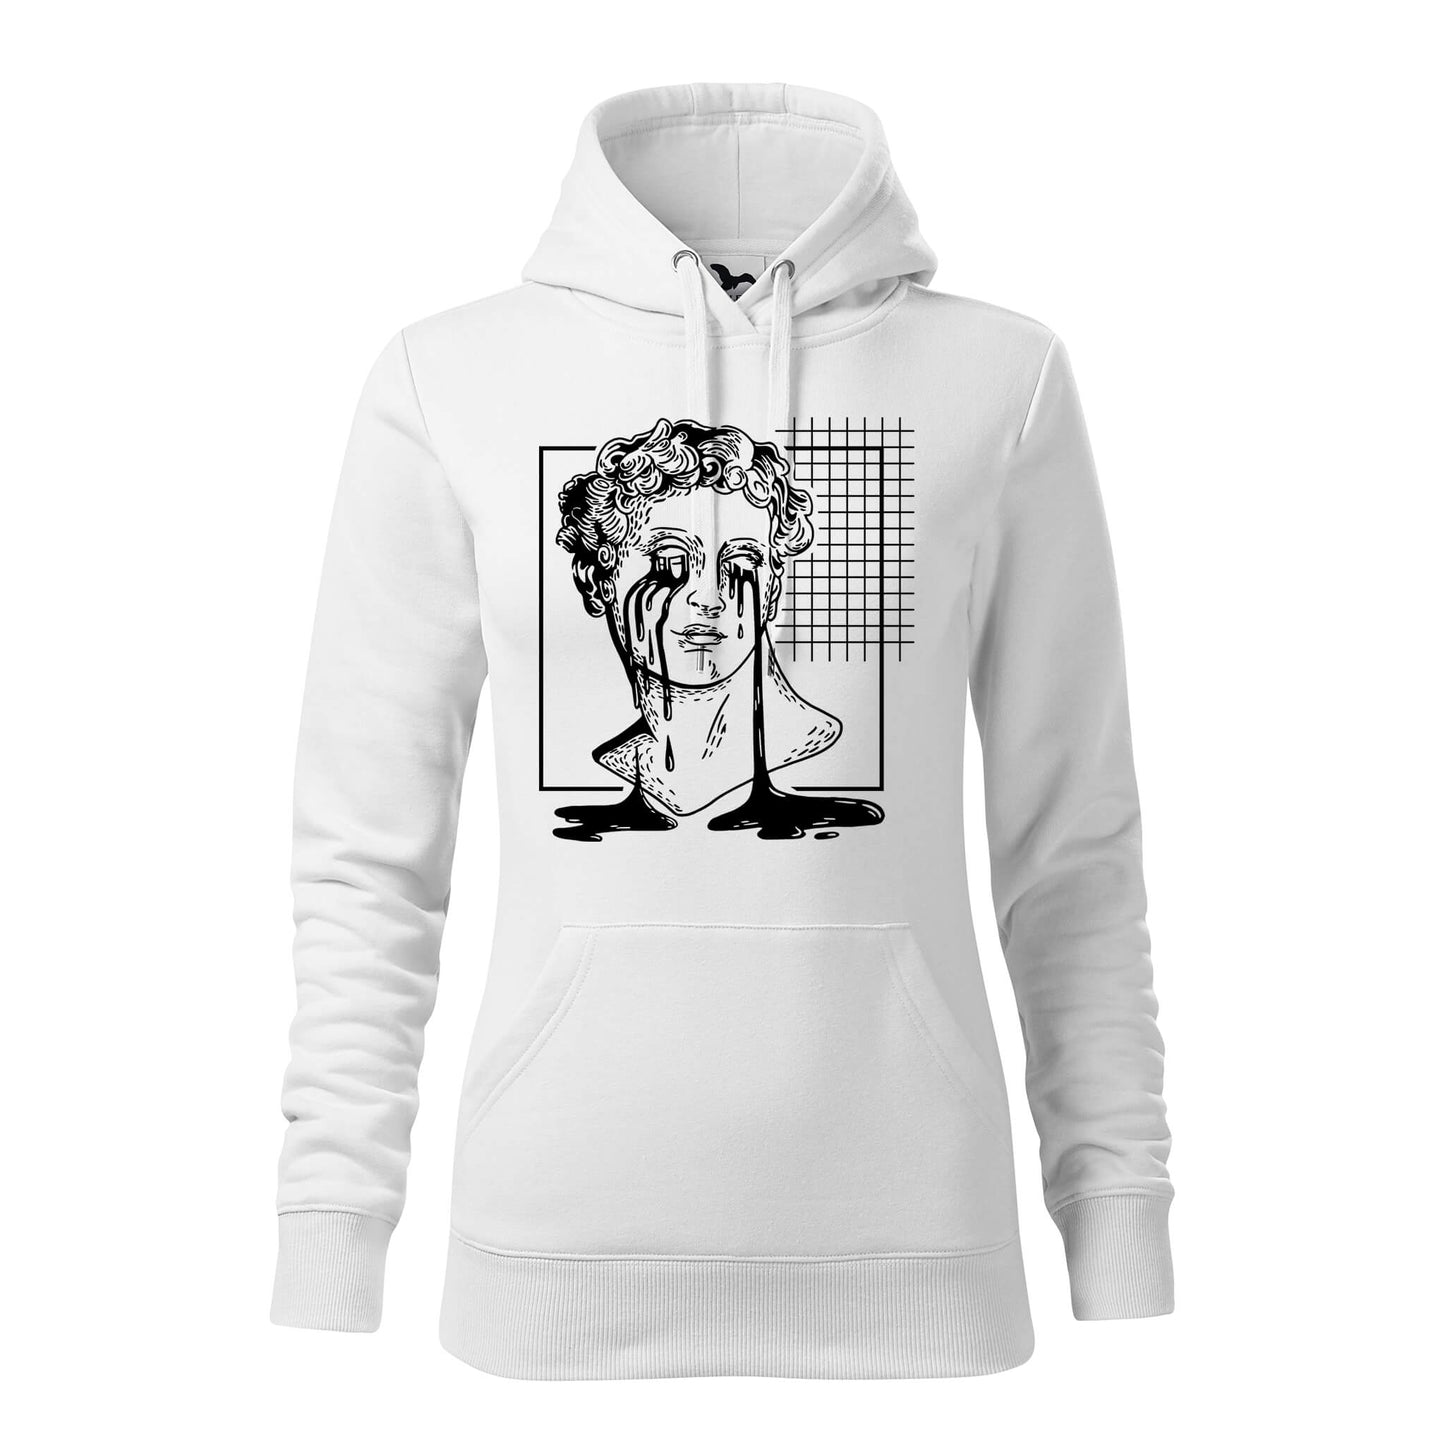 Bust crying hoodie - rvdesignprint